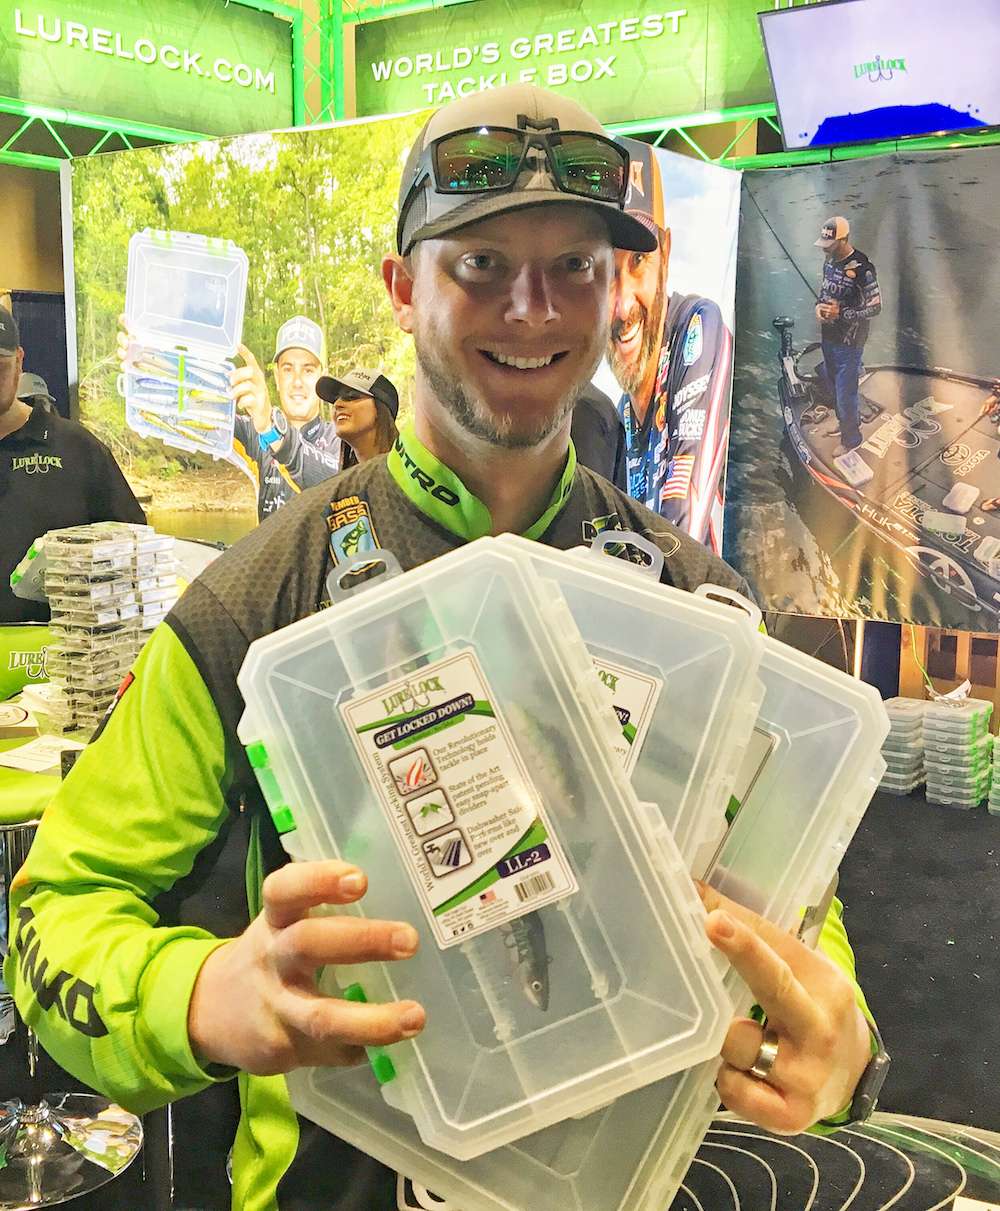 Jonathon VanDam, nephew of Kevin VanDam, has been on the Bassmaster Elite Series since 2011, and he earned 18 top 10 finishes total in B.A.S.S. tournaments.